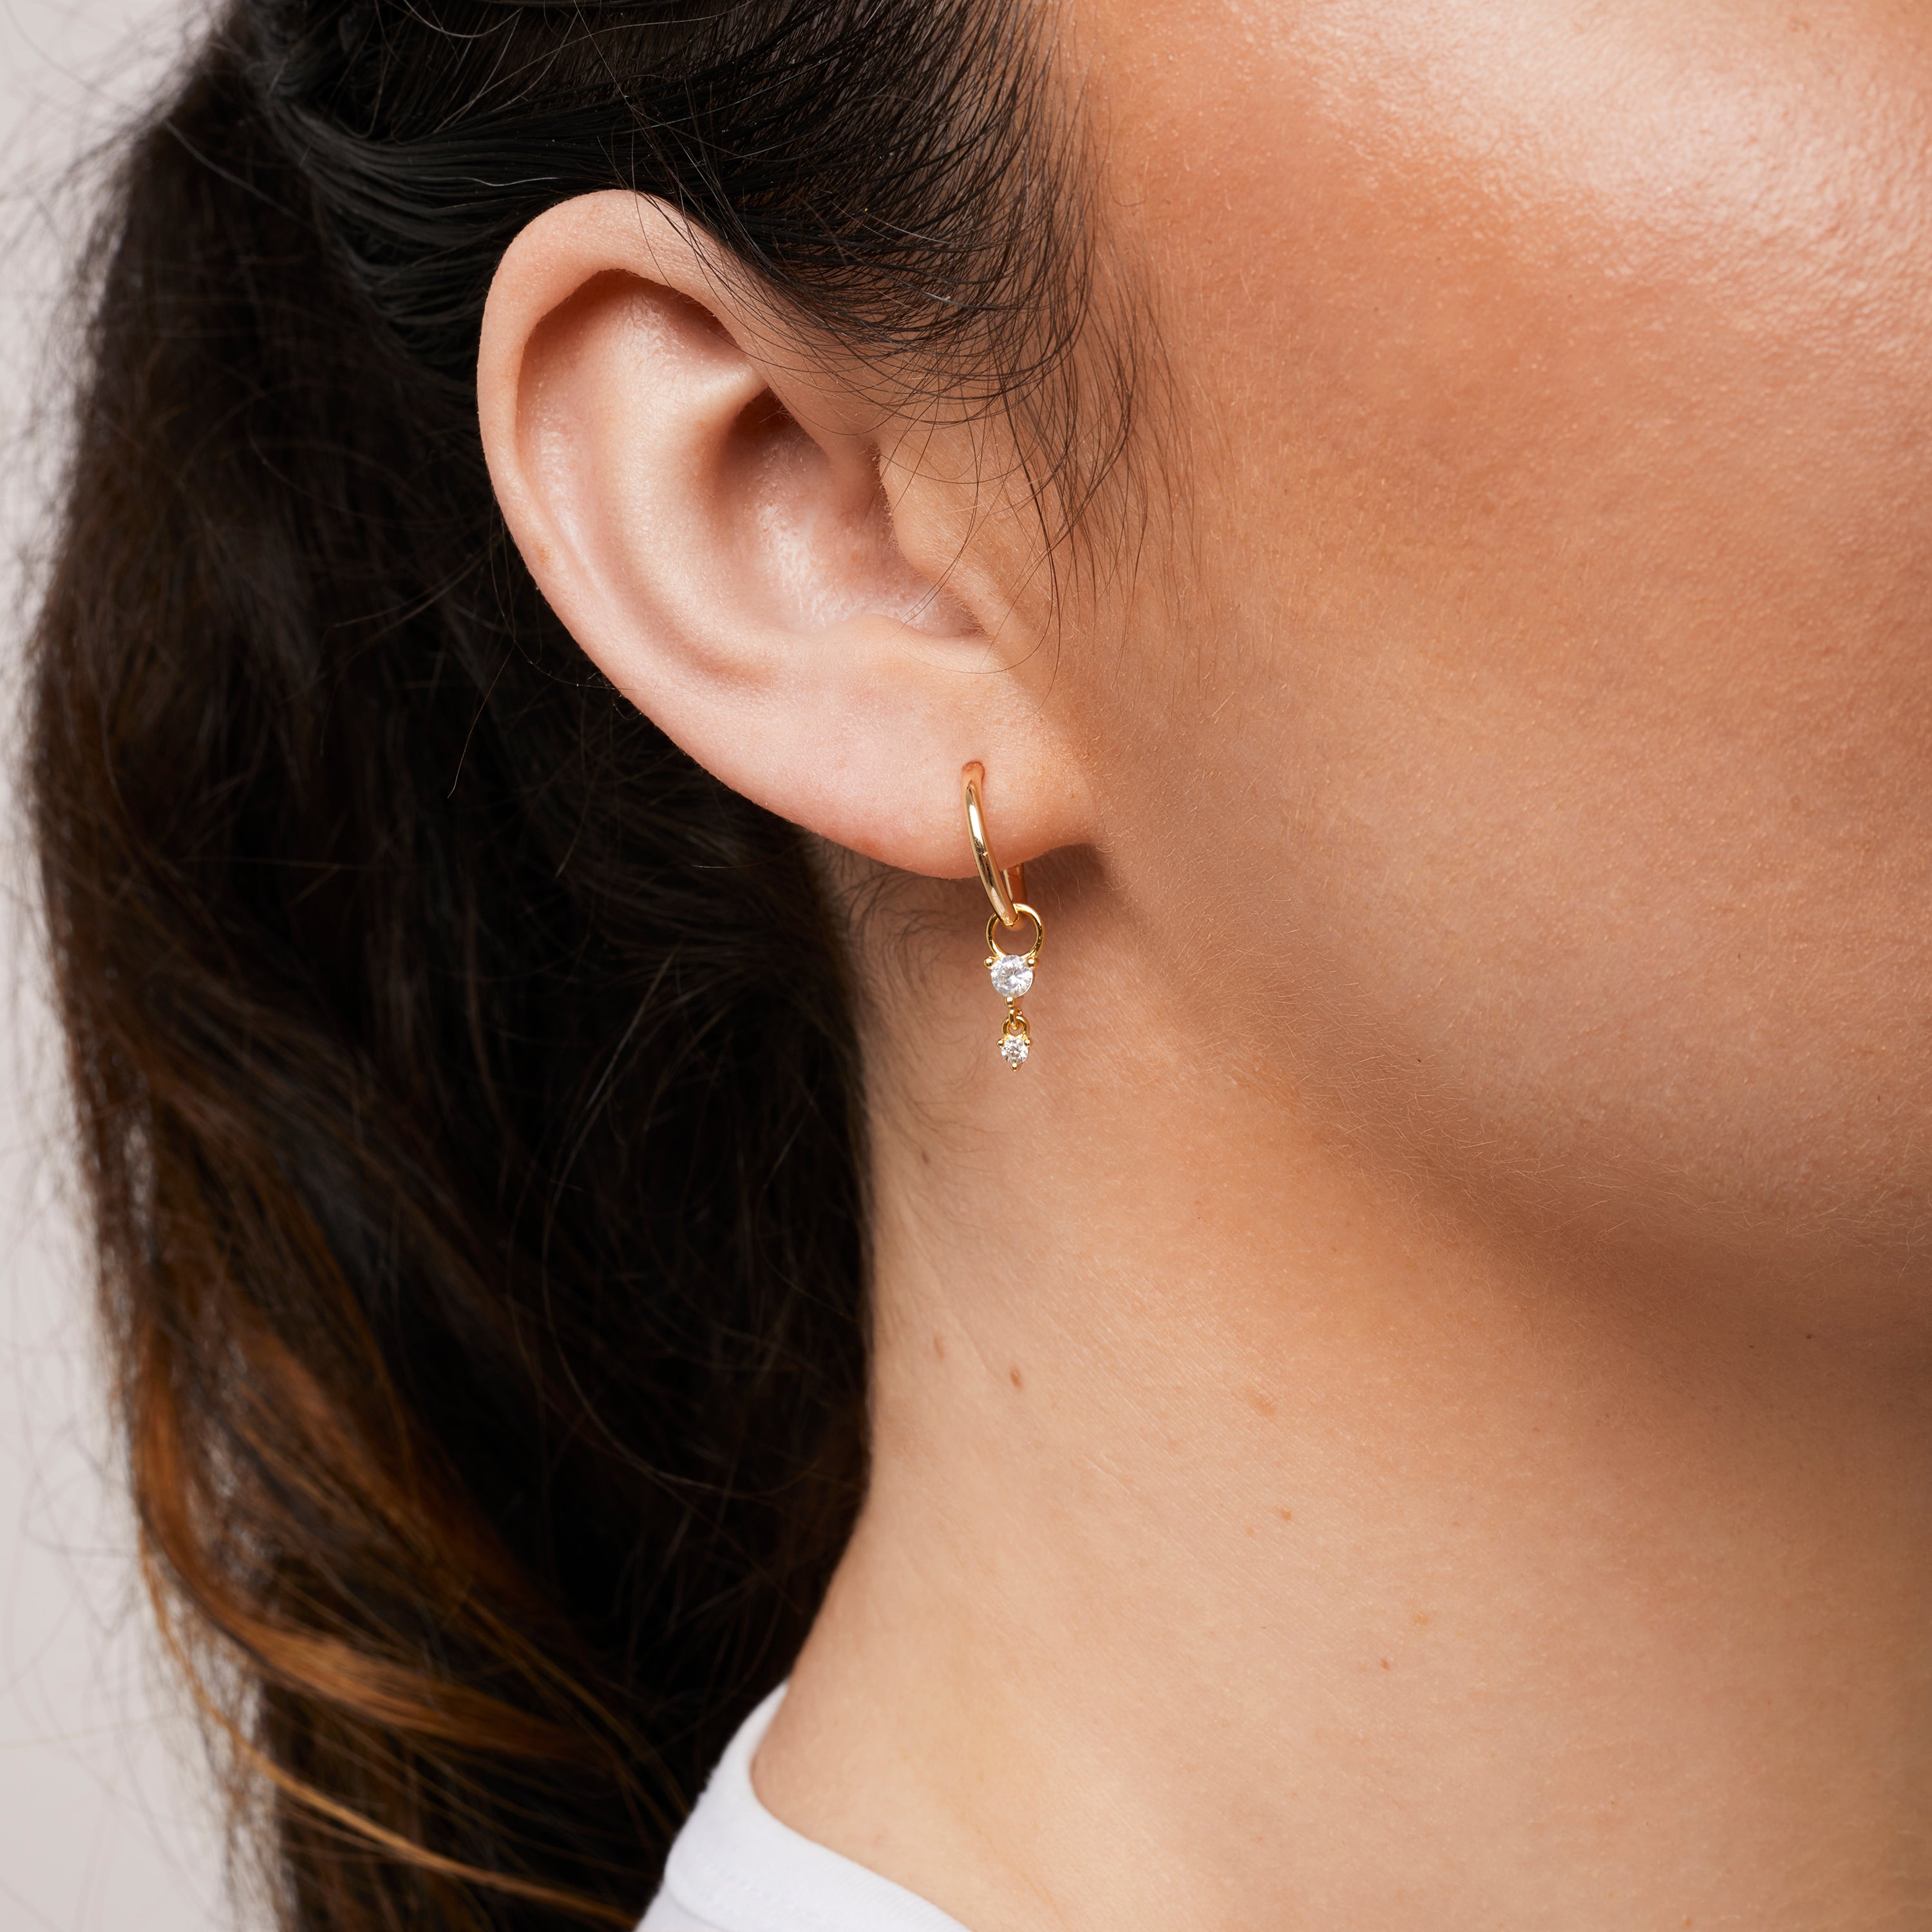 A model wearing the Cluster Hoop Charms in Gold are made with high-quality materials, including 18K gold plating over 925 Sterling Silver. These charms are both non-tarnish and water resistant. The perfect combination of style and durability.